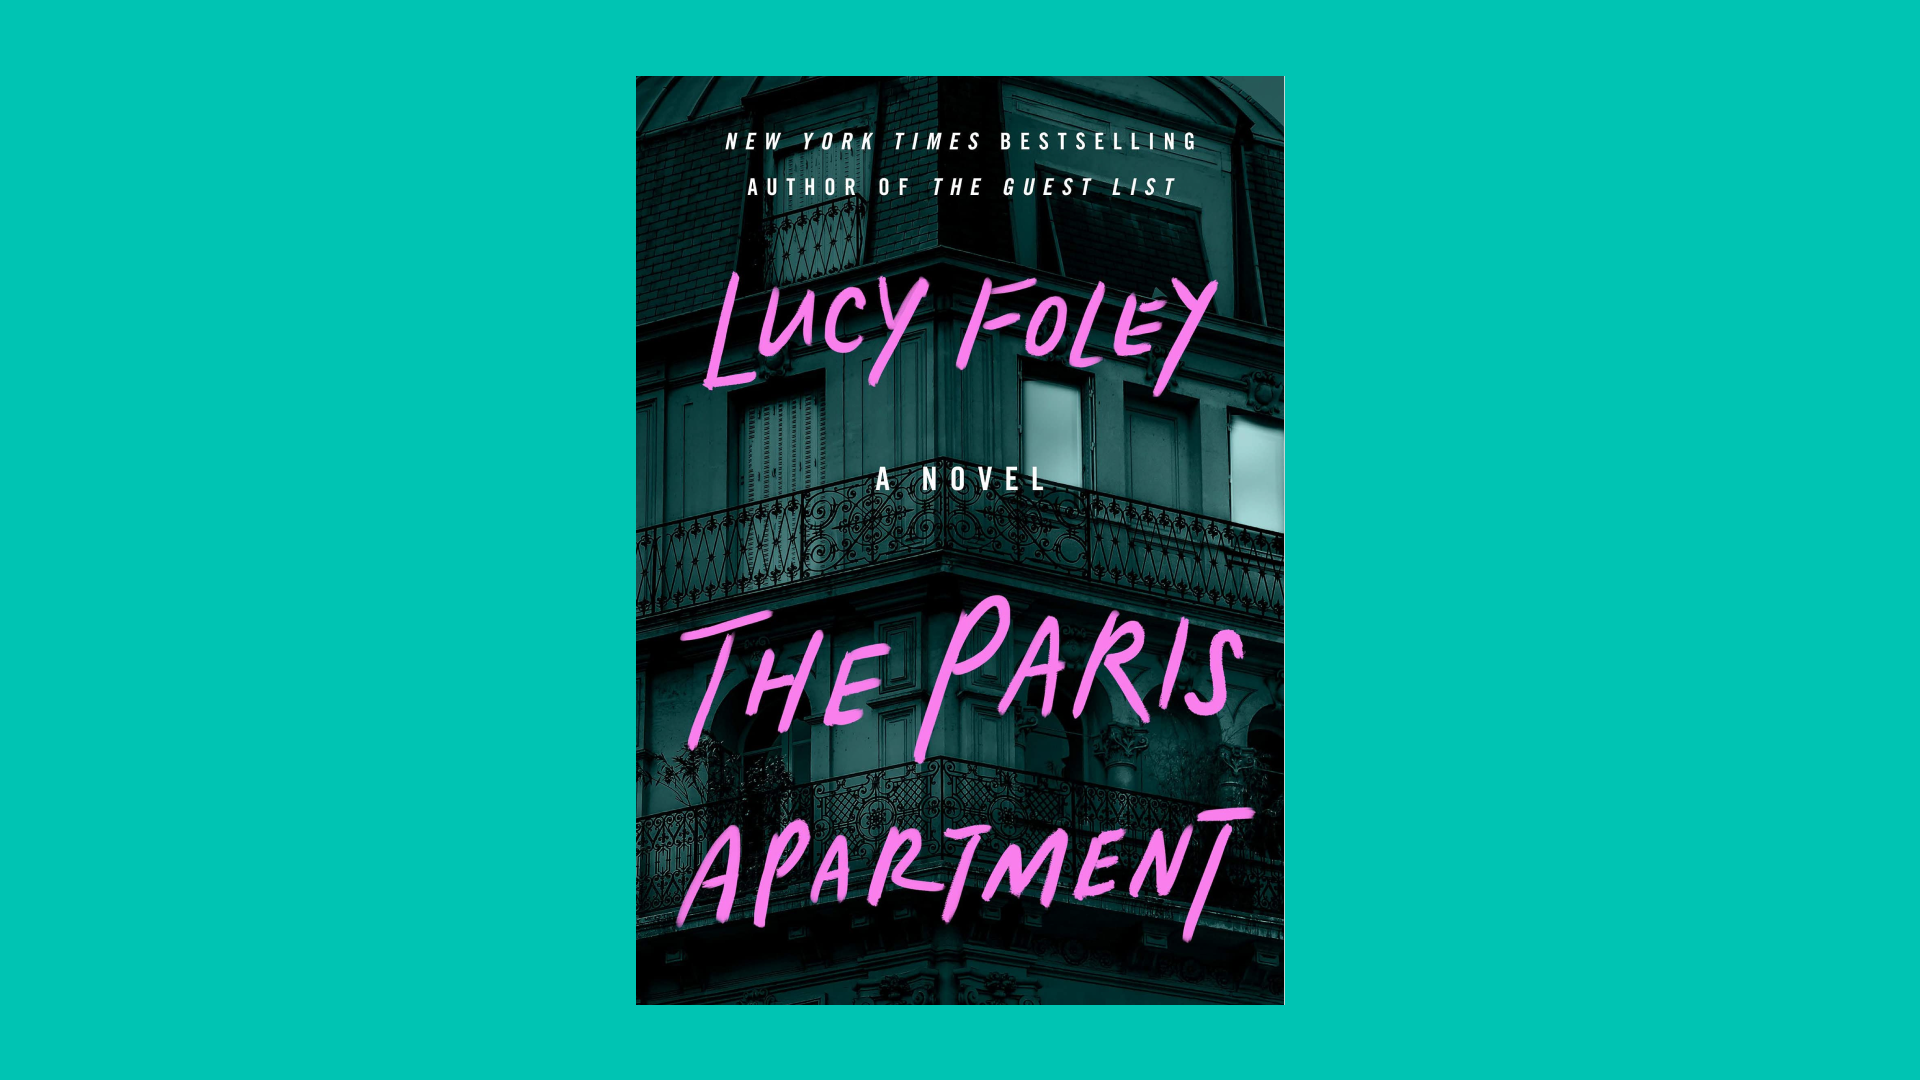 “The Paris Apartment” by Lucy Foley